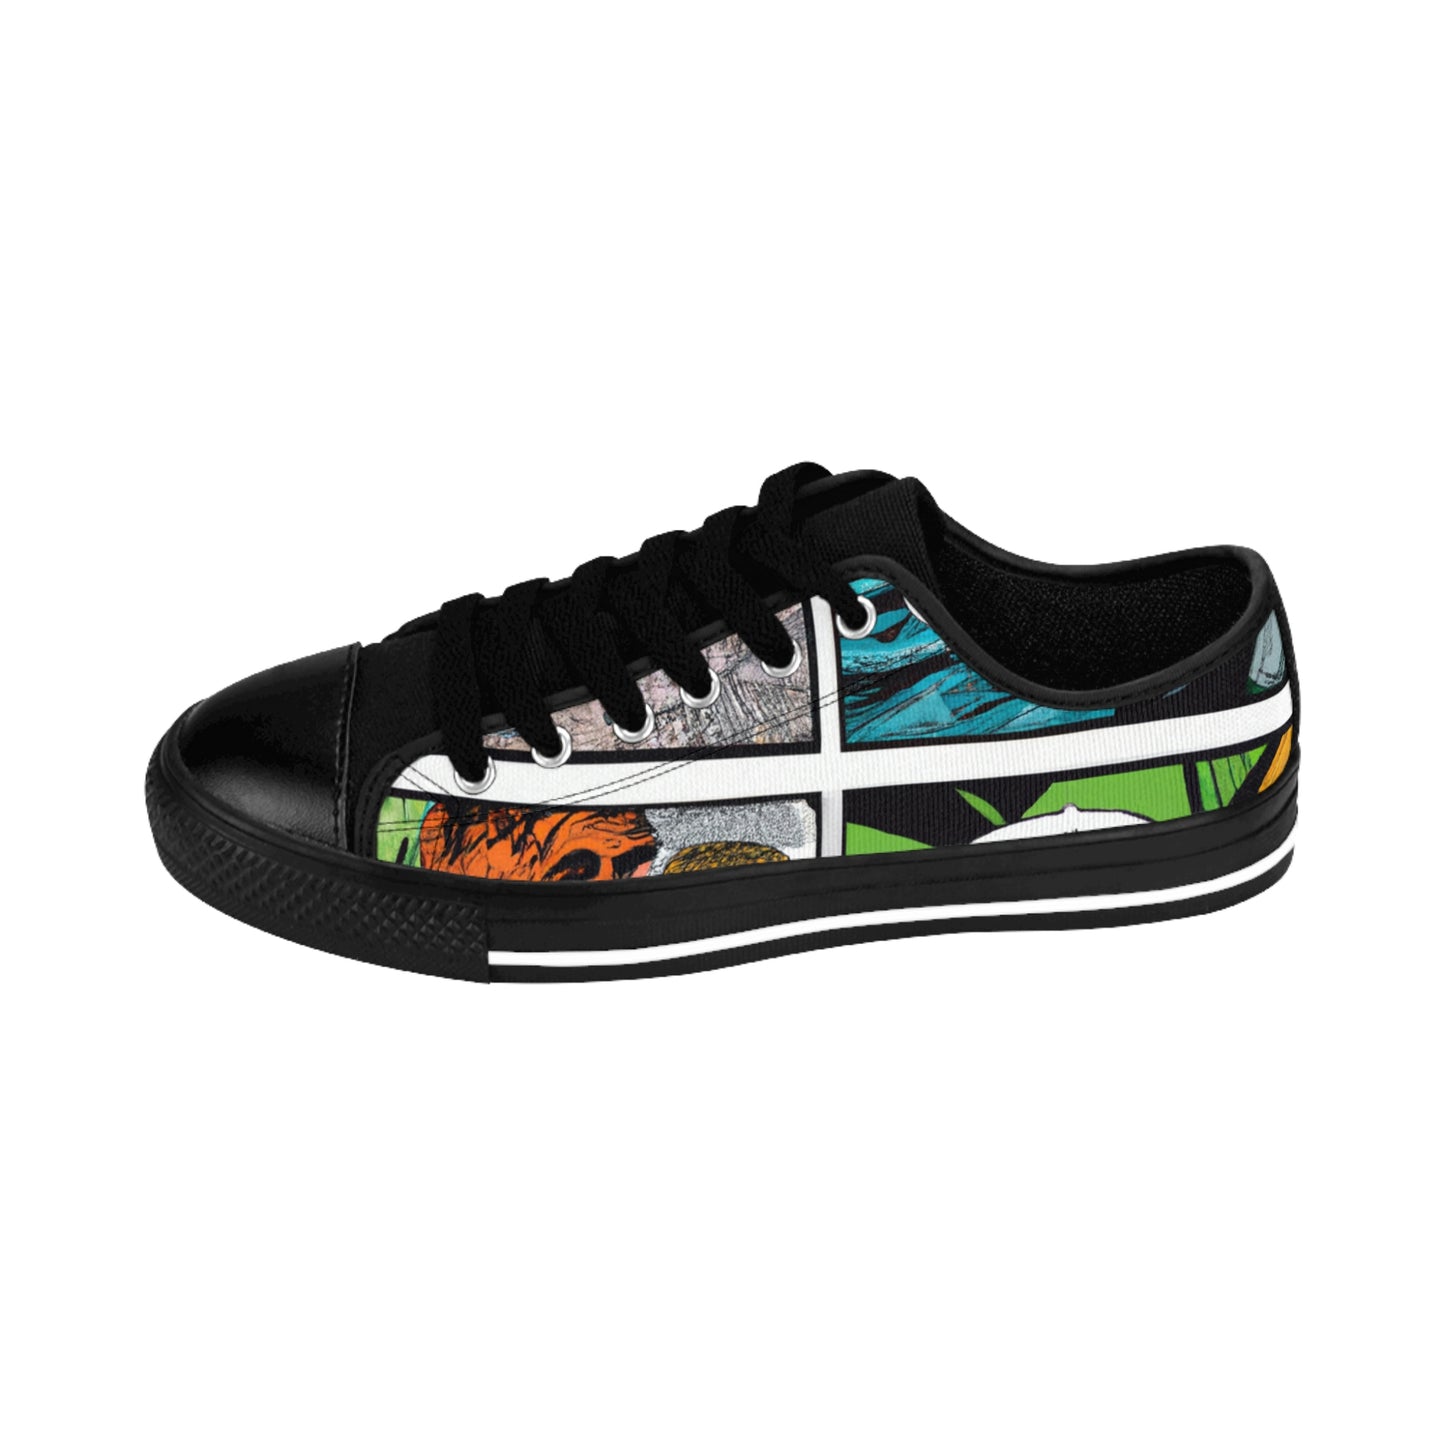 Grizelwald the Shoemaker - Comic Book Low Top